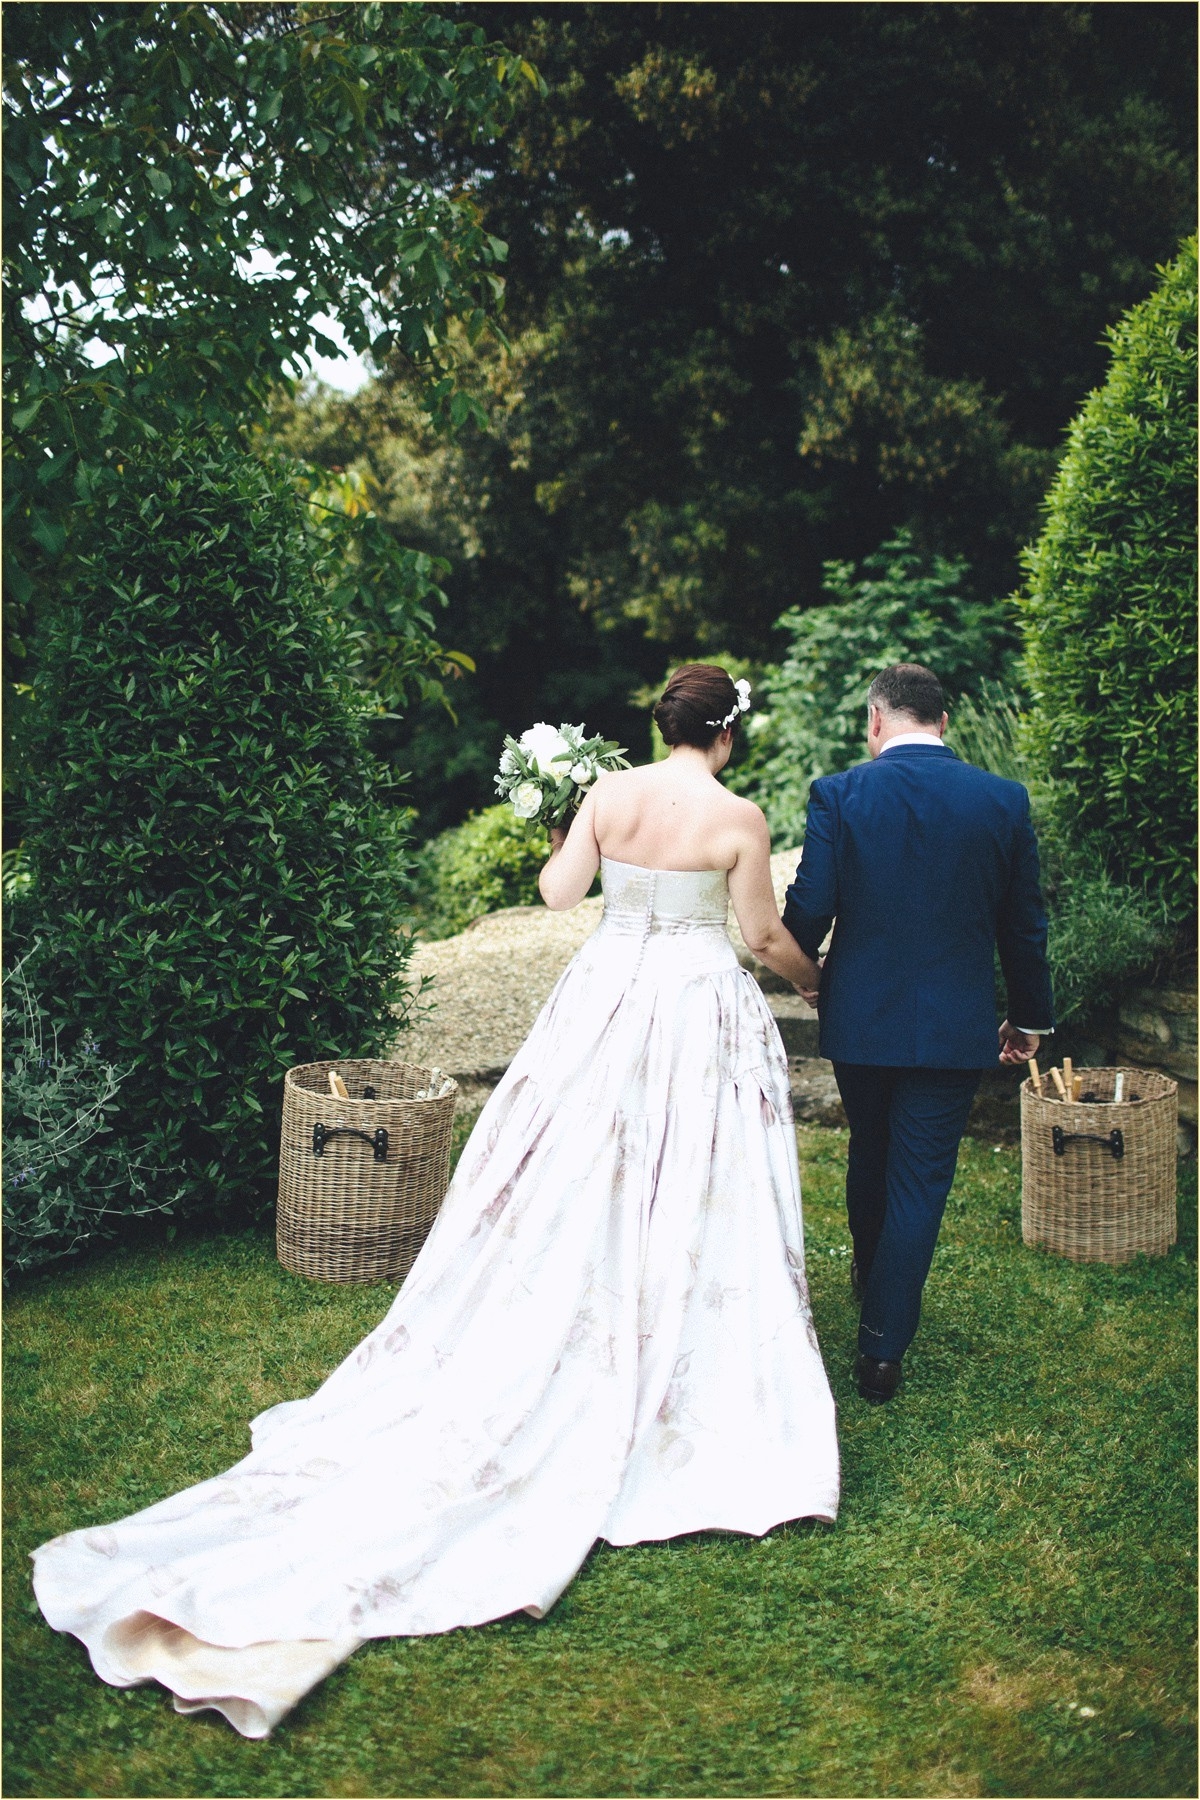 a gold floral vera wang gown for a romantic garden wedding in the italian countryside